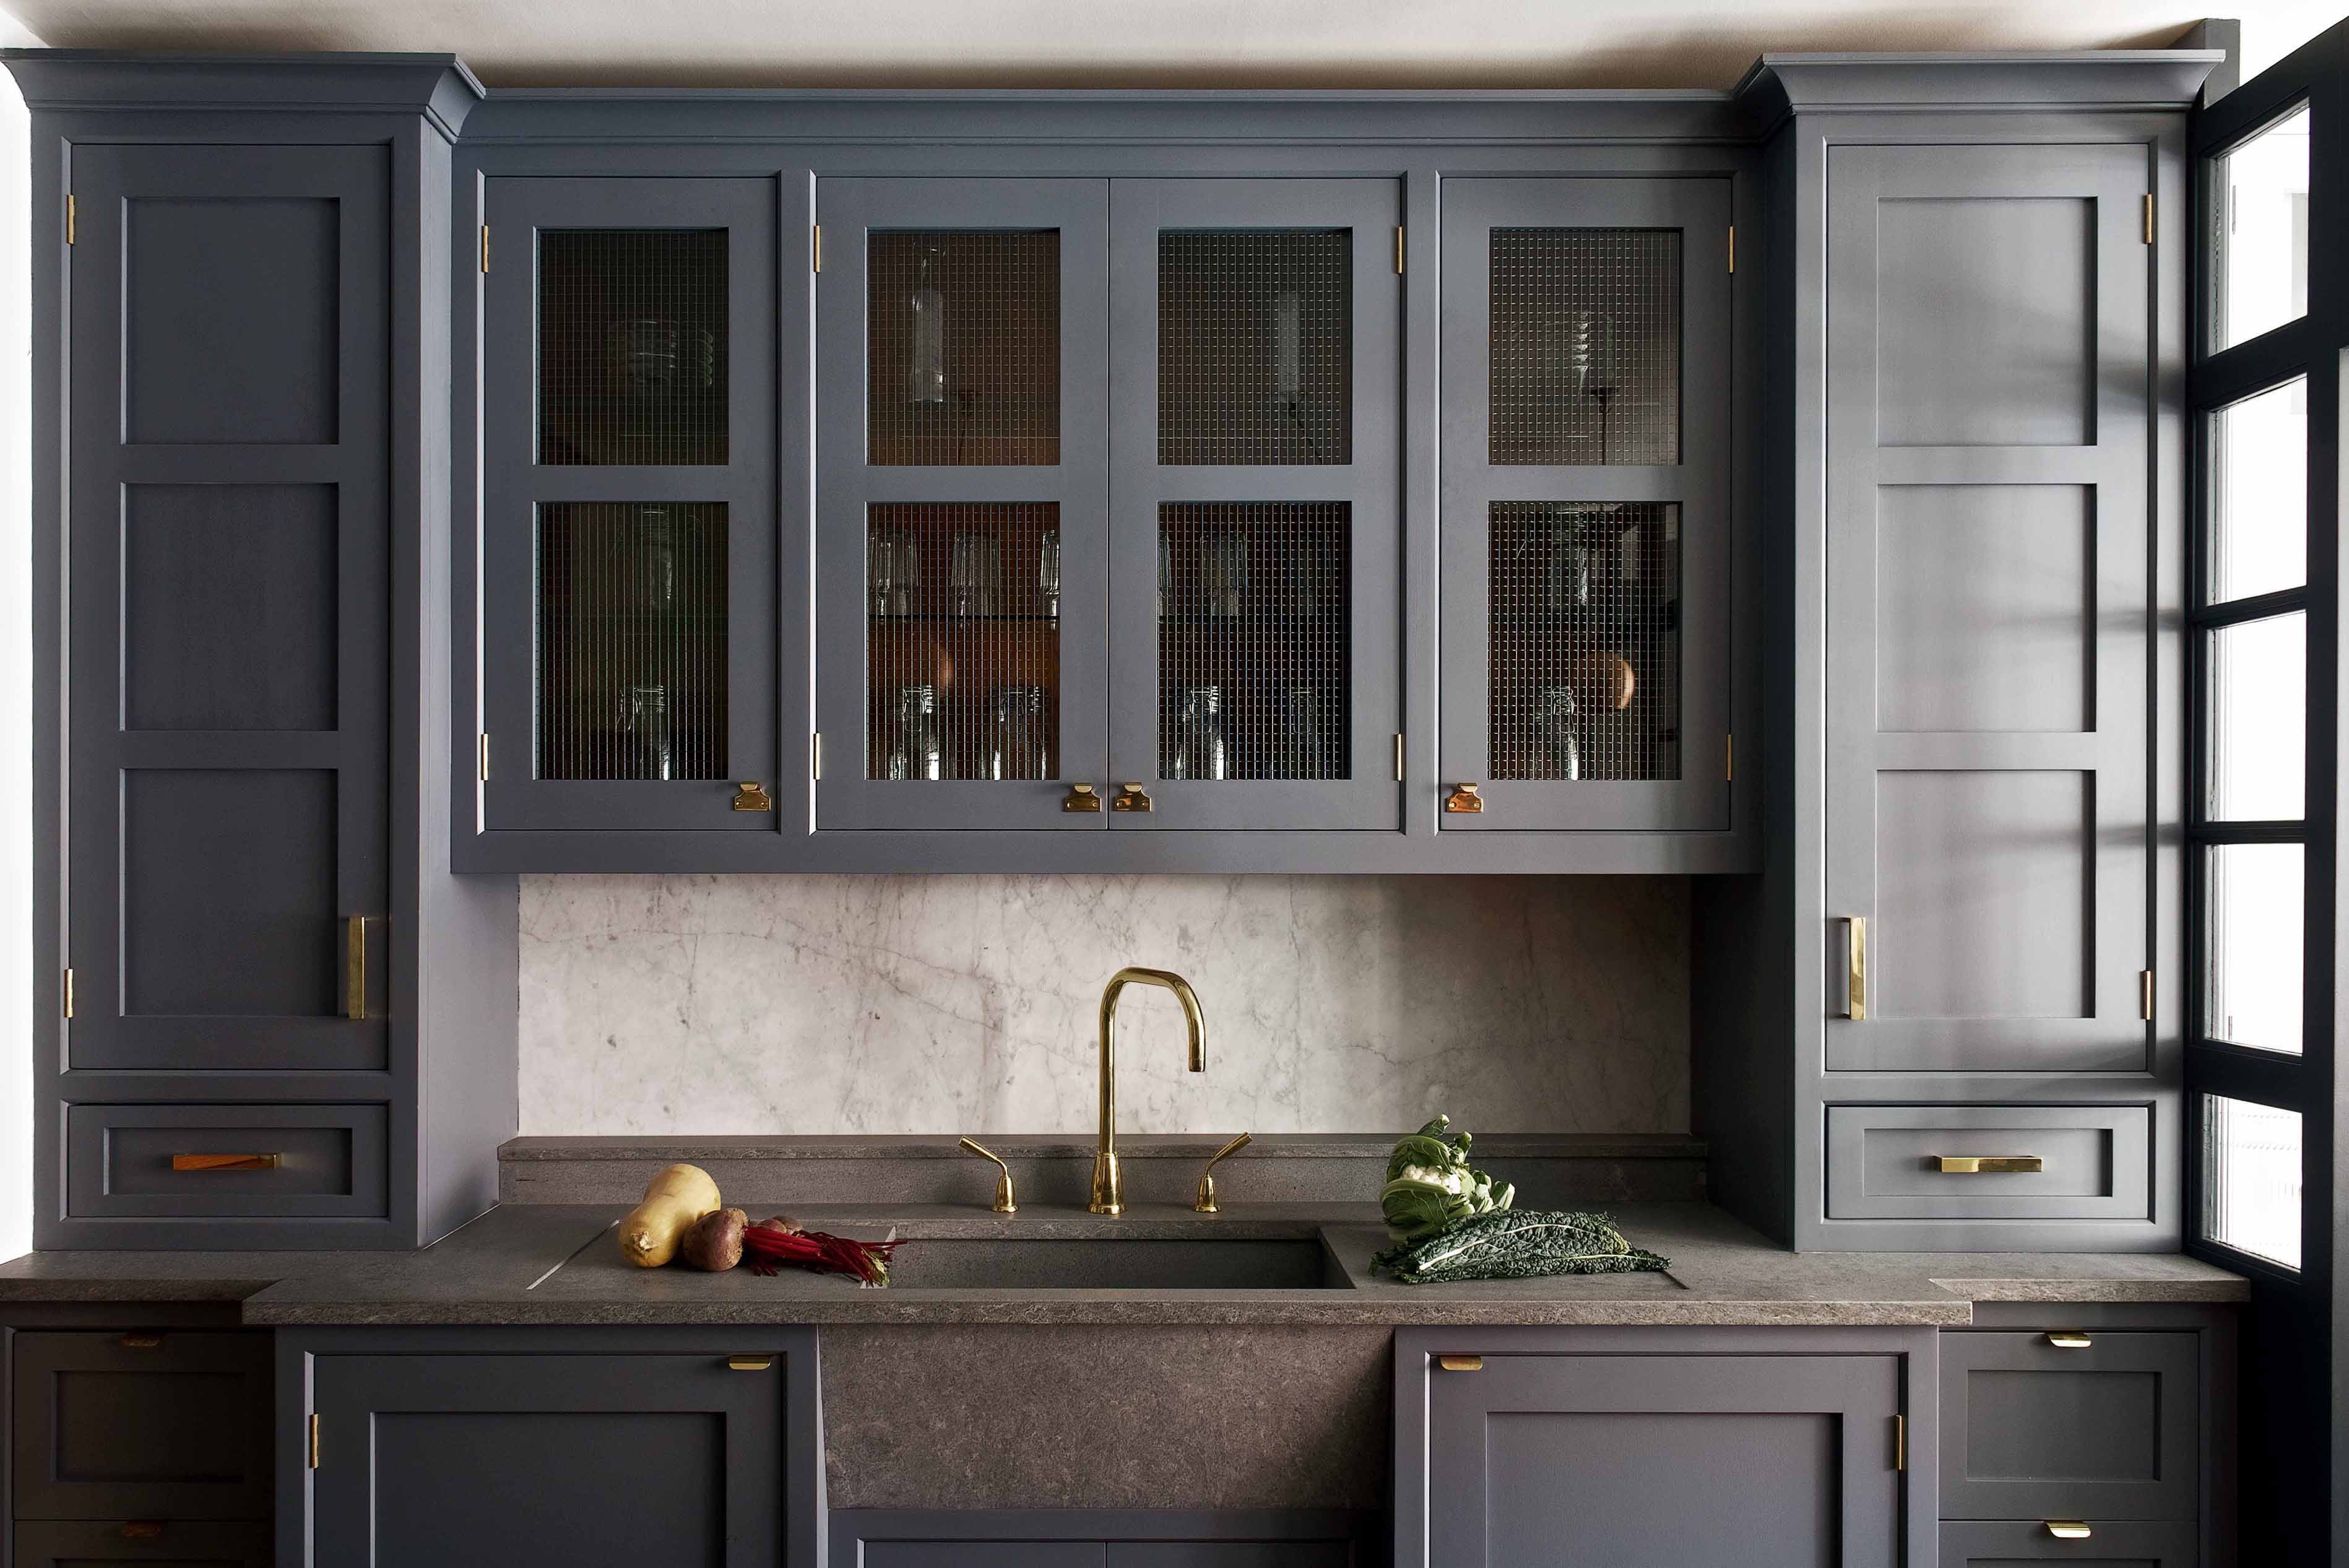 Bespoke kitchen collections - KINGHAM